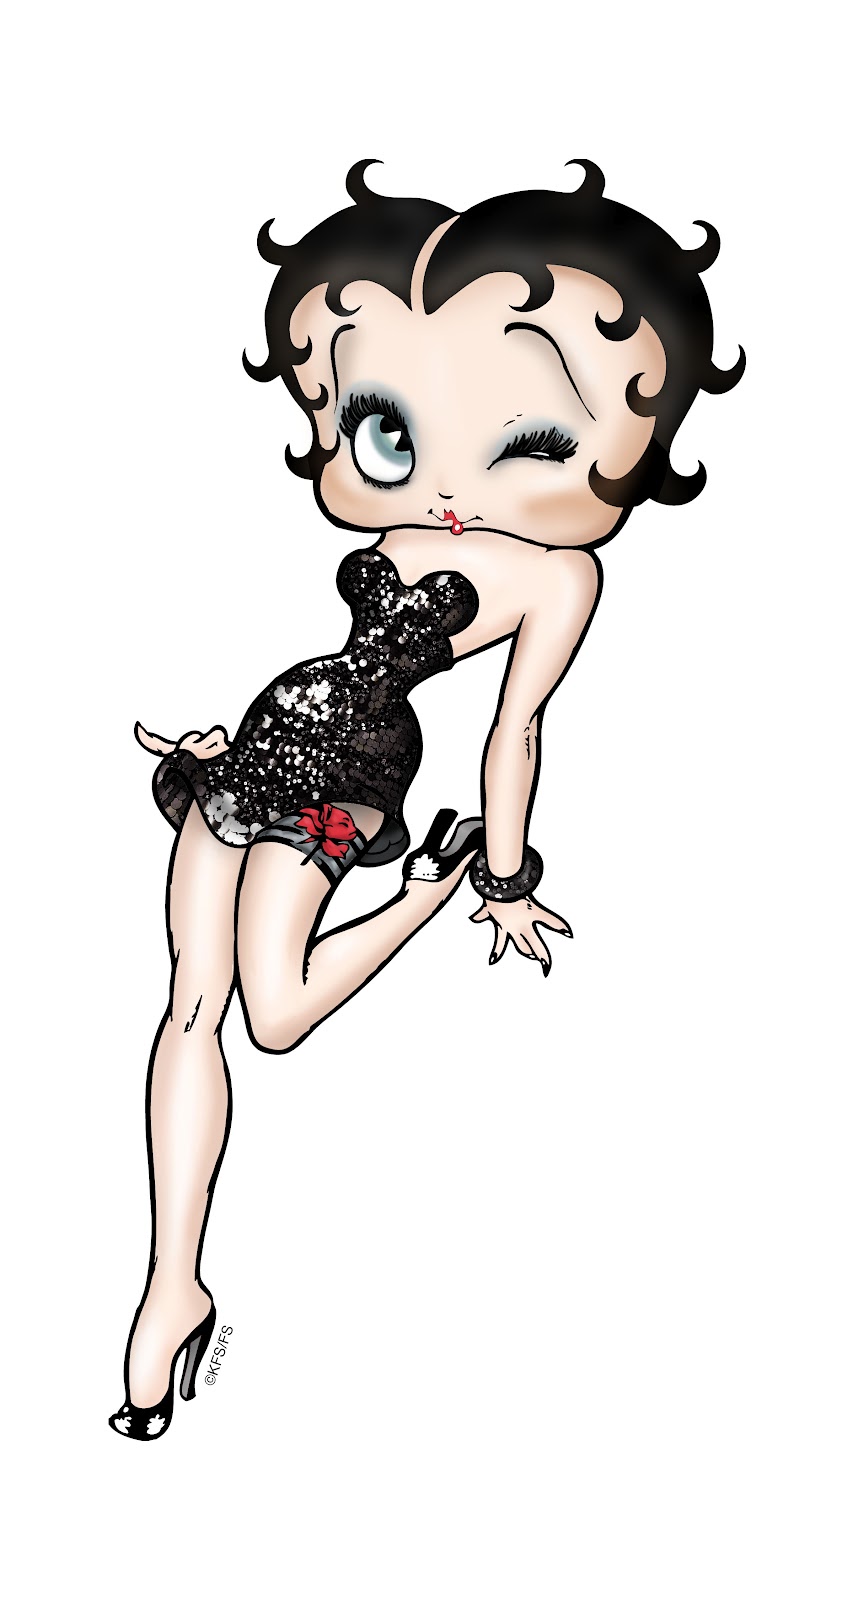 Voice of Betty Boop